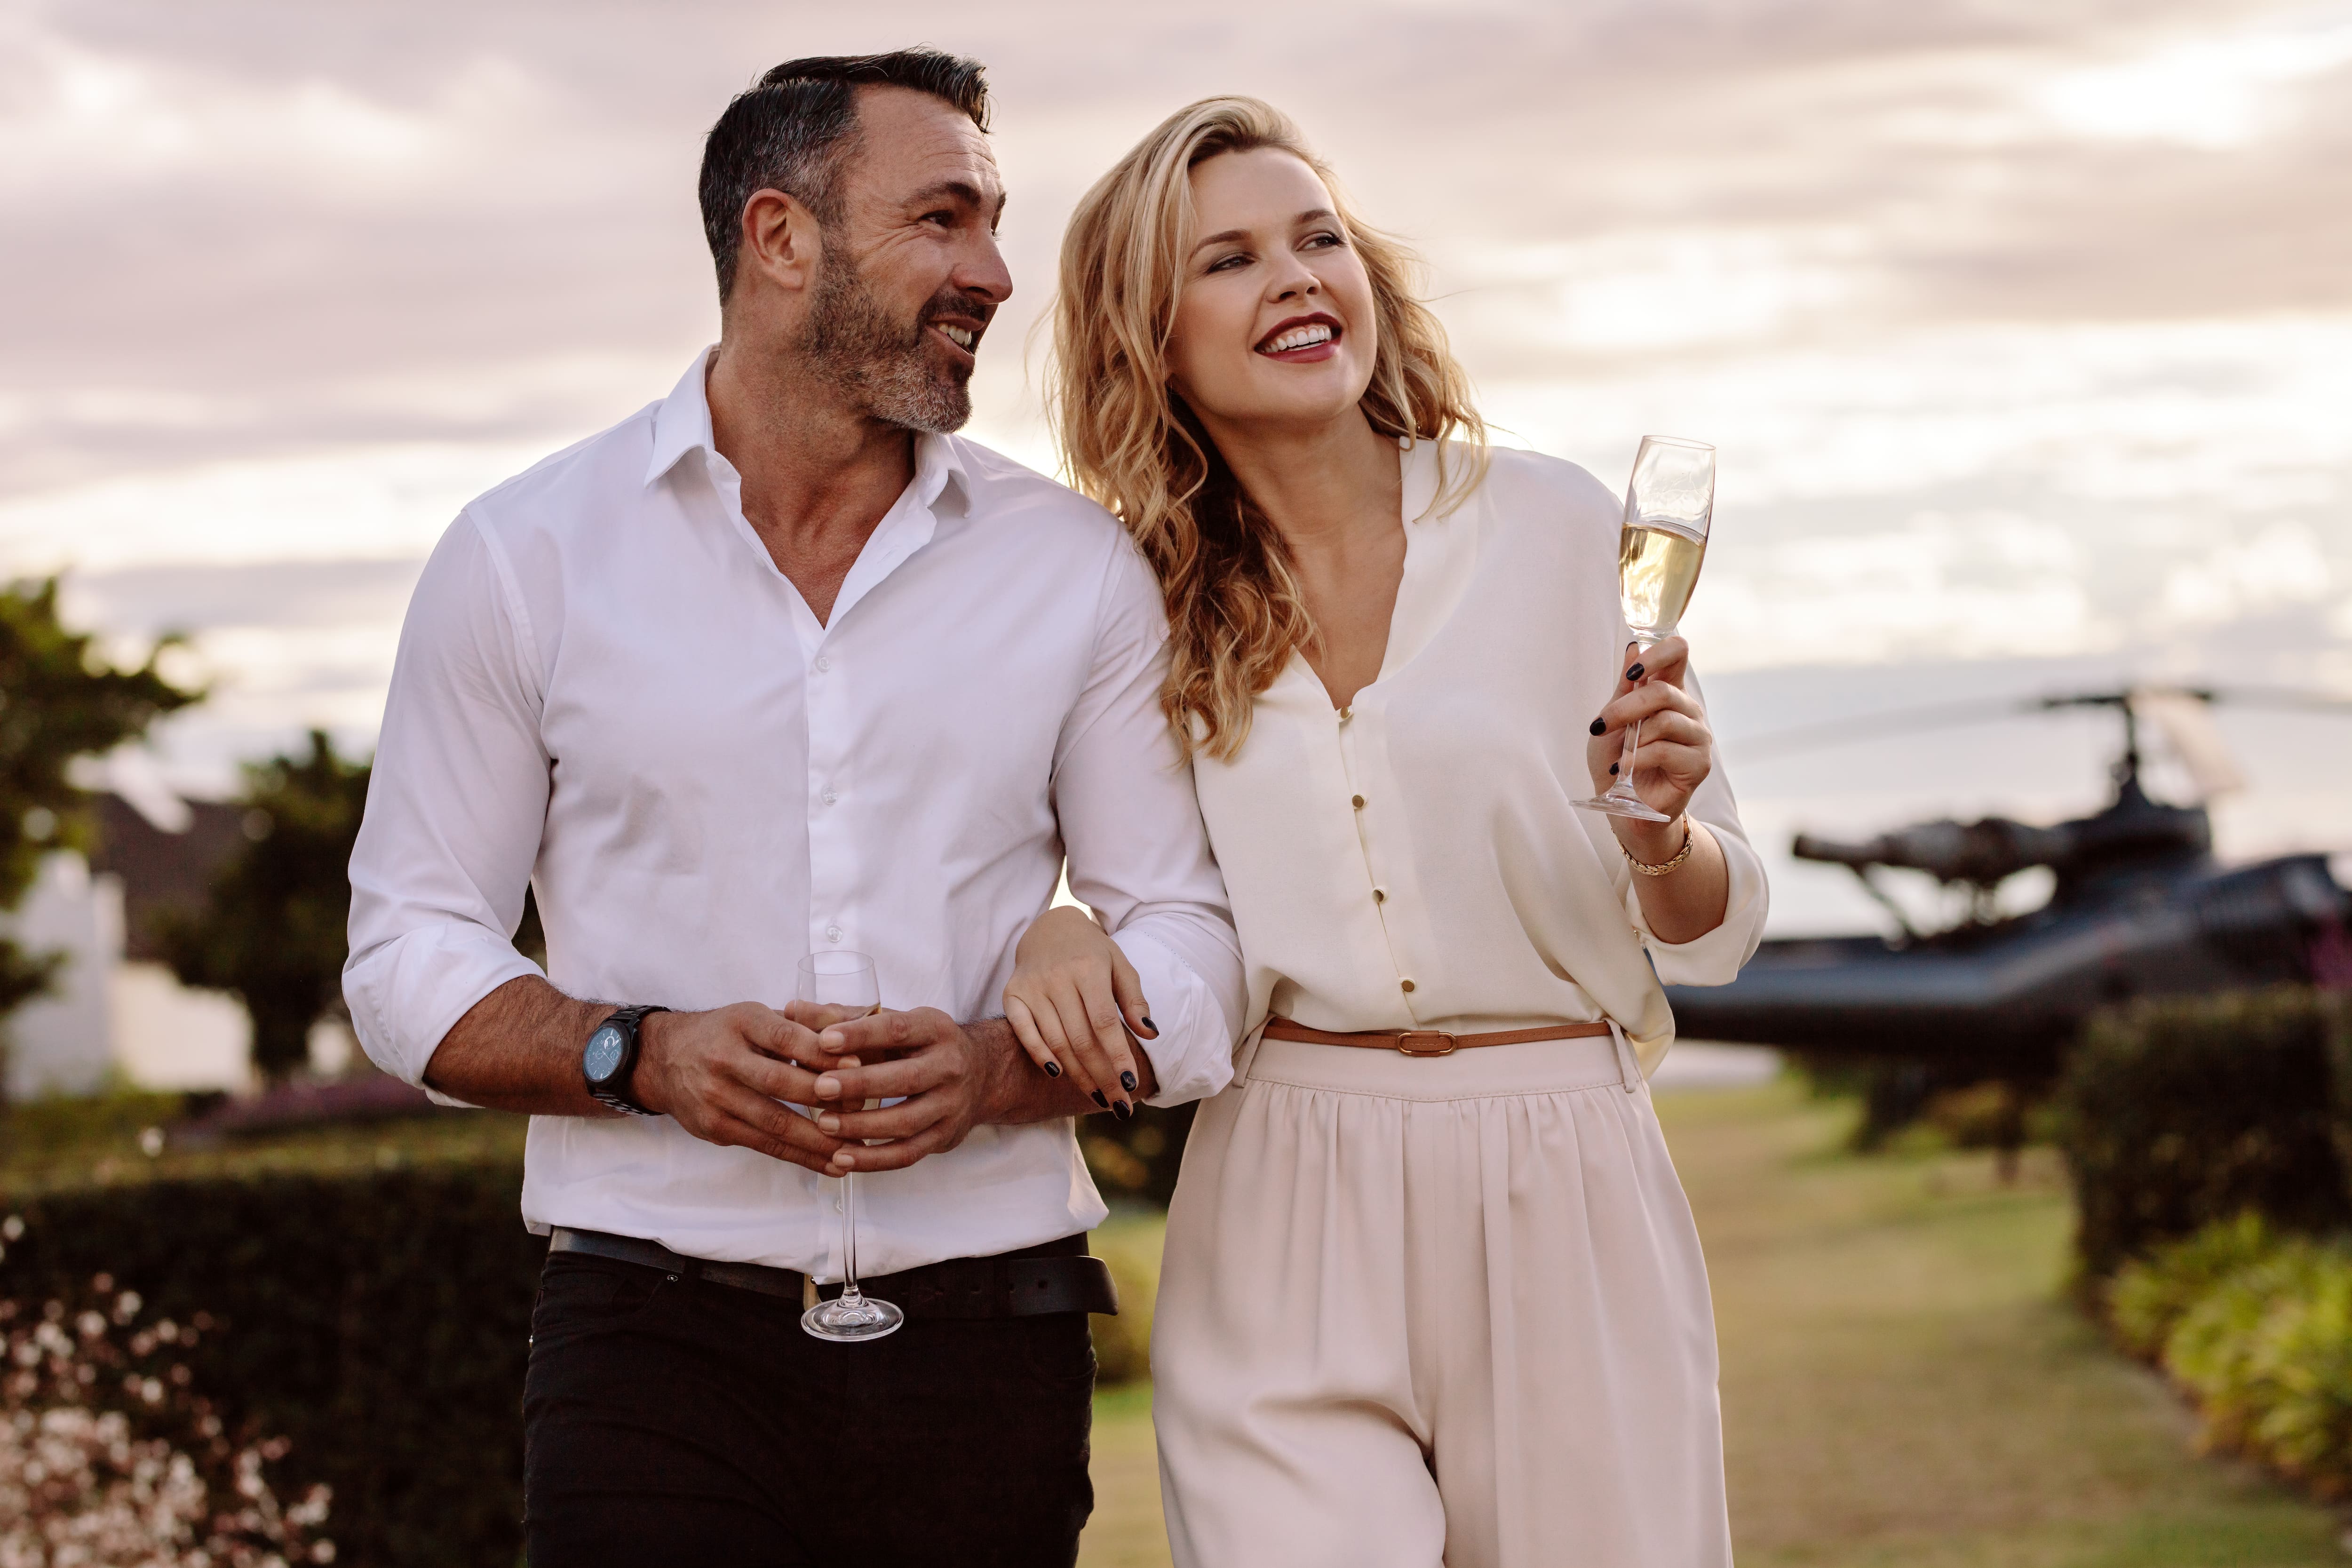 Rich couple walking together outdoors holding wine glass